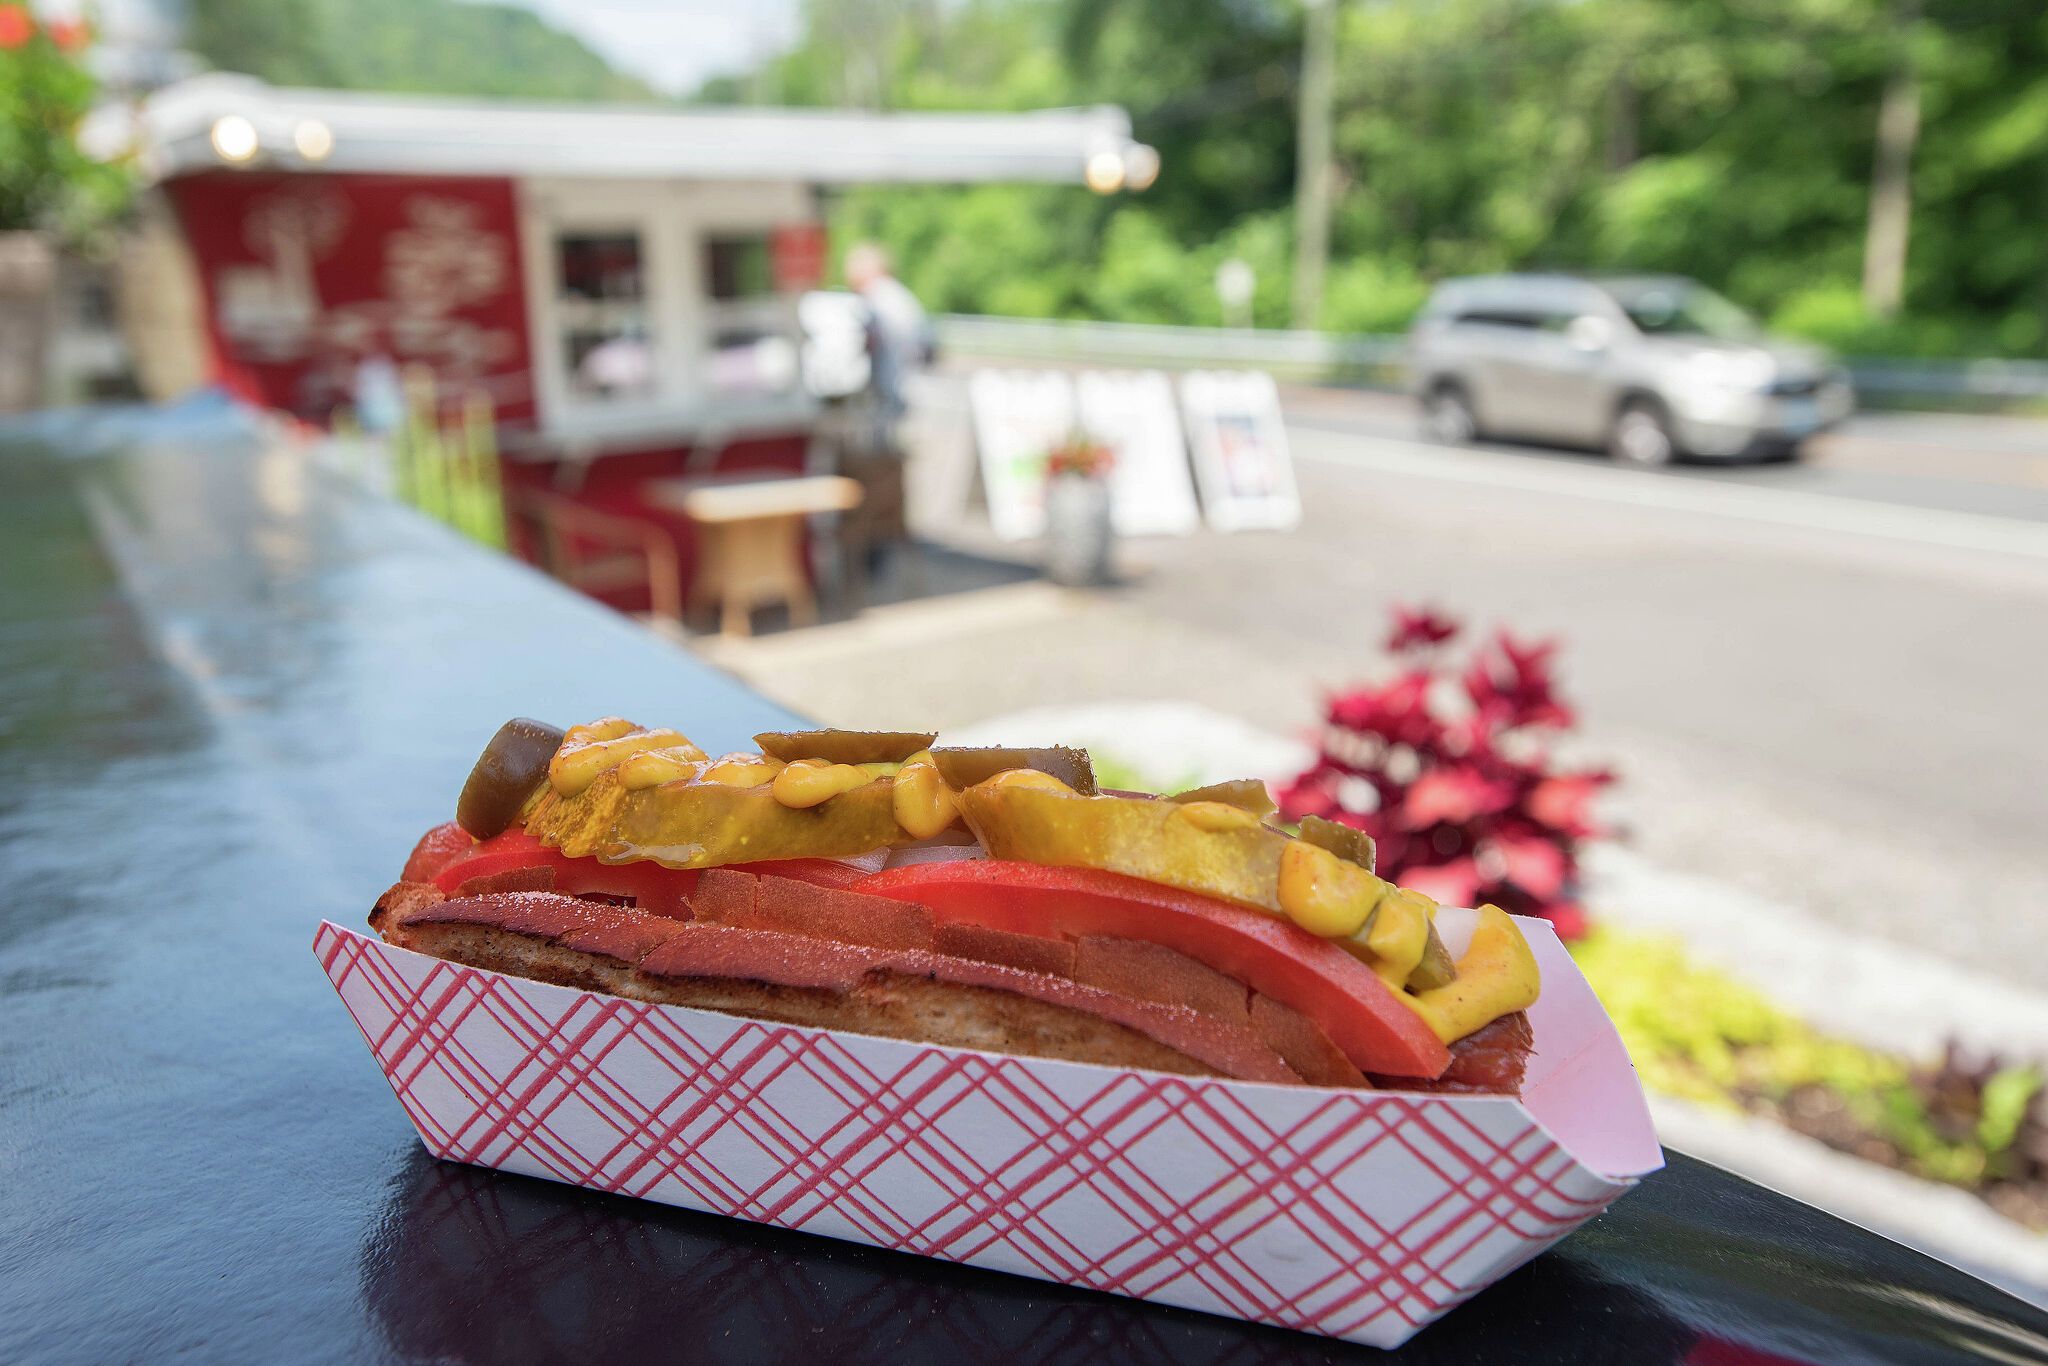 Owner is frank about selling hot dog wagon